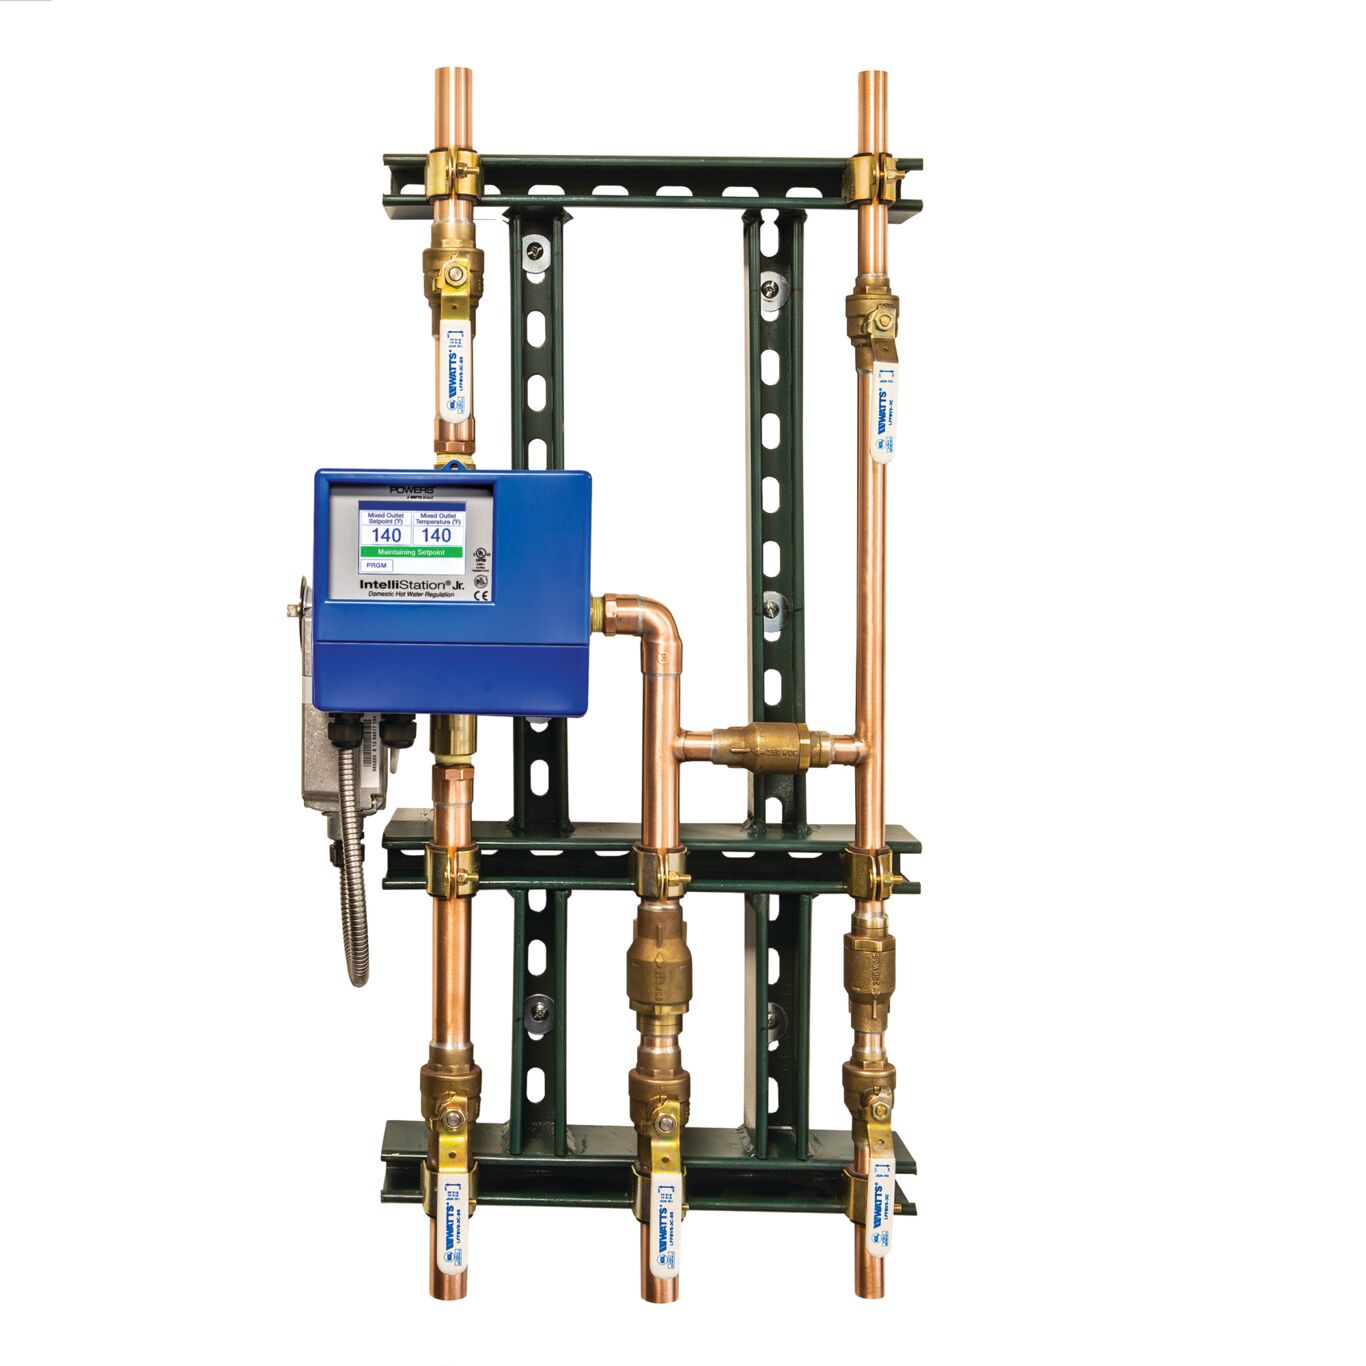 Product Image - IntelliStation Jr with Piping